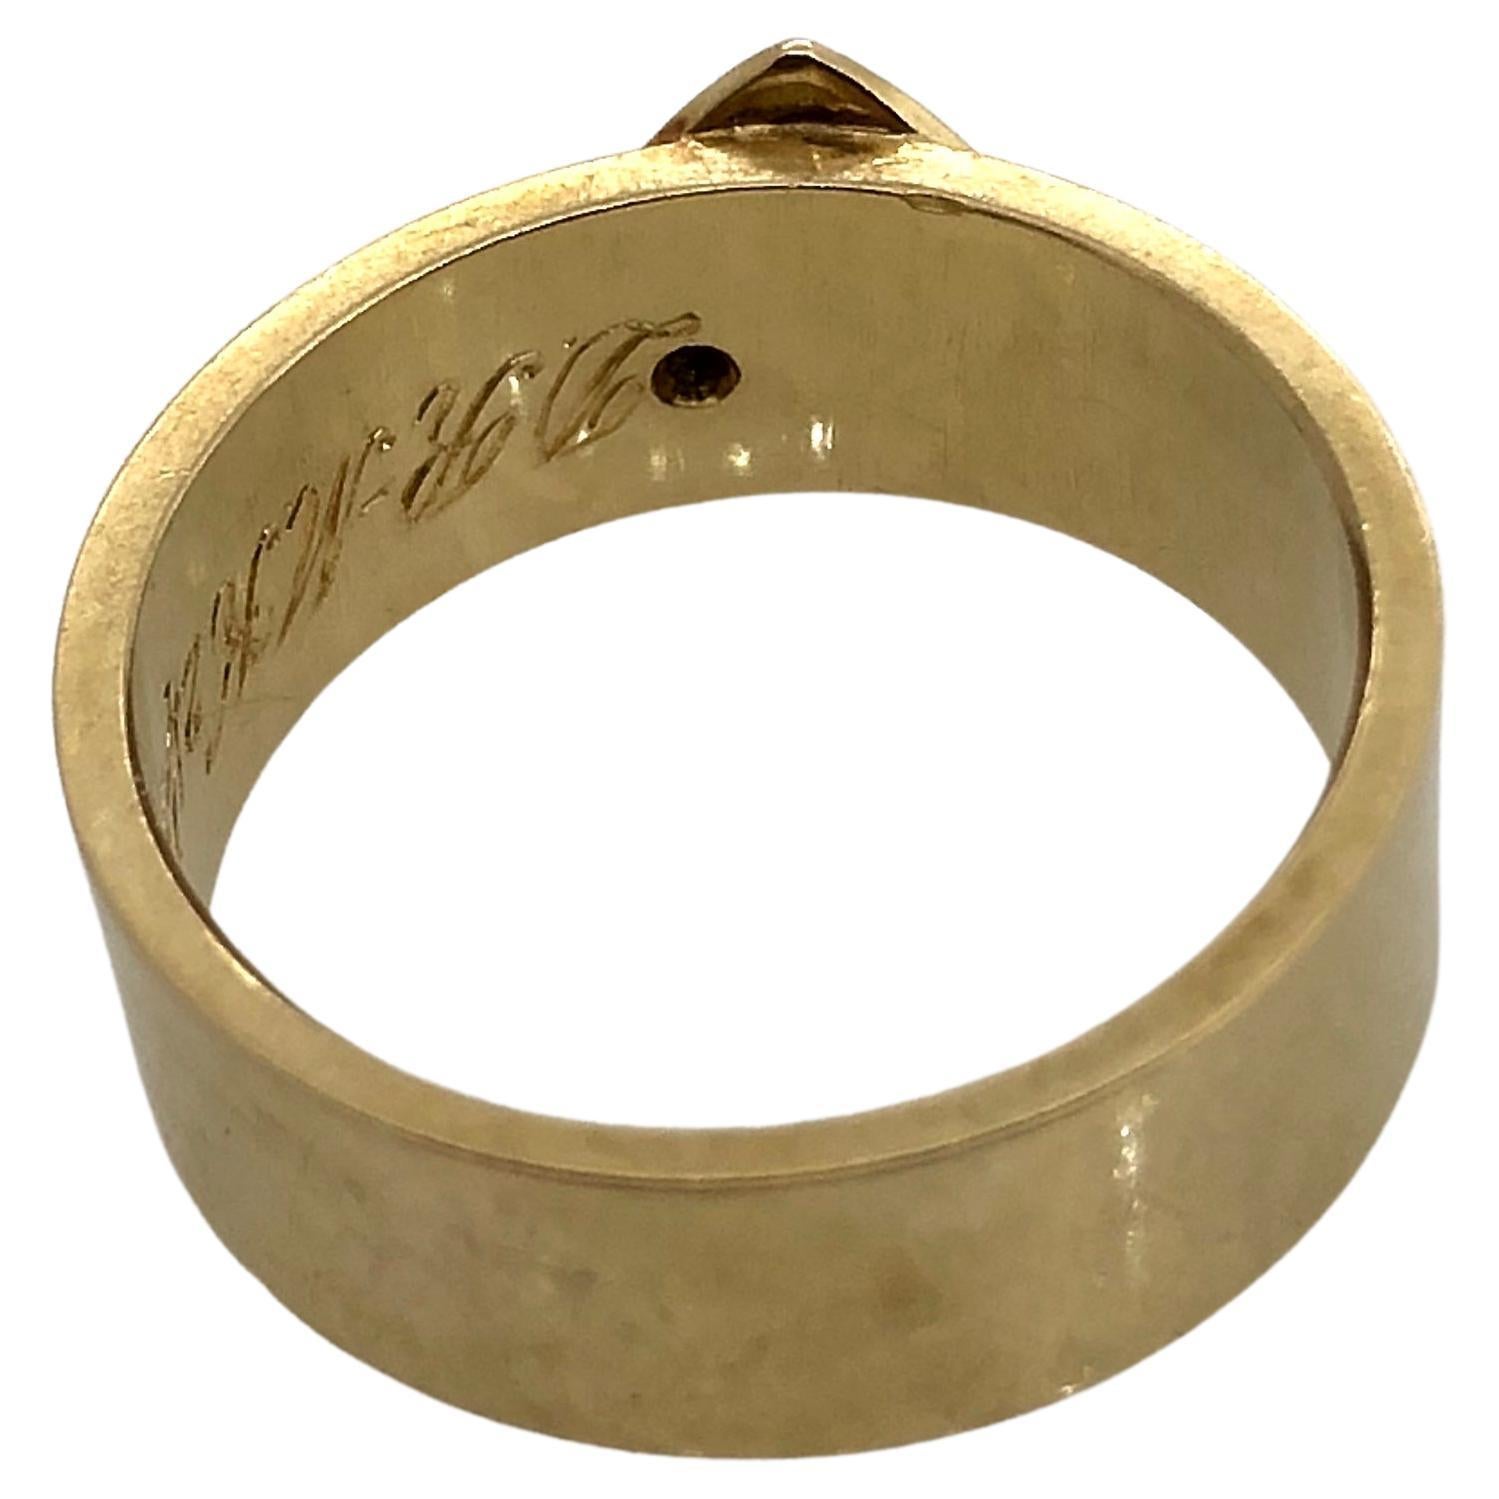 Unique solid 18 carat gold flat ring with a heart set with one tiny diamond and a seed pearl
Band width is 7.2 mm, thickness is 1.26 mm, heart dimensions are approx. 9.9 mm x 9.3 mm
Ring size is Q (US Size 8)
Weight of the ring is 9.43